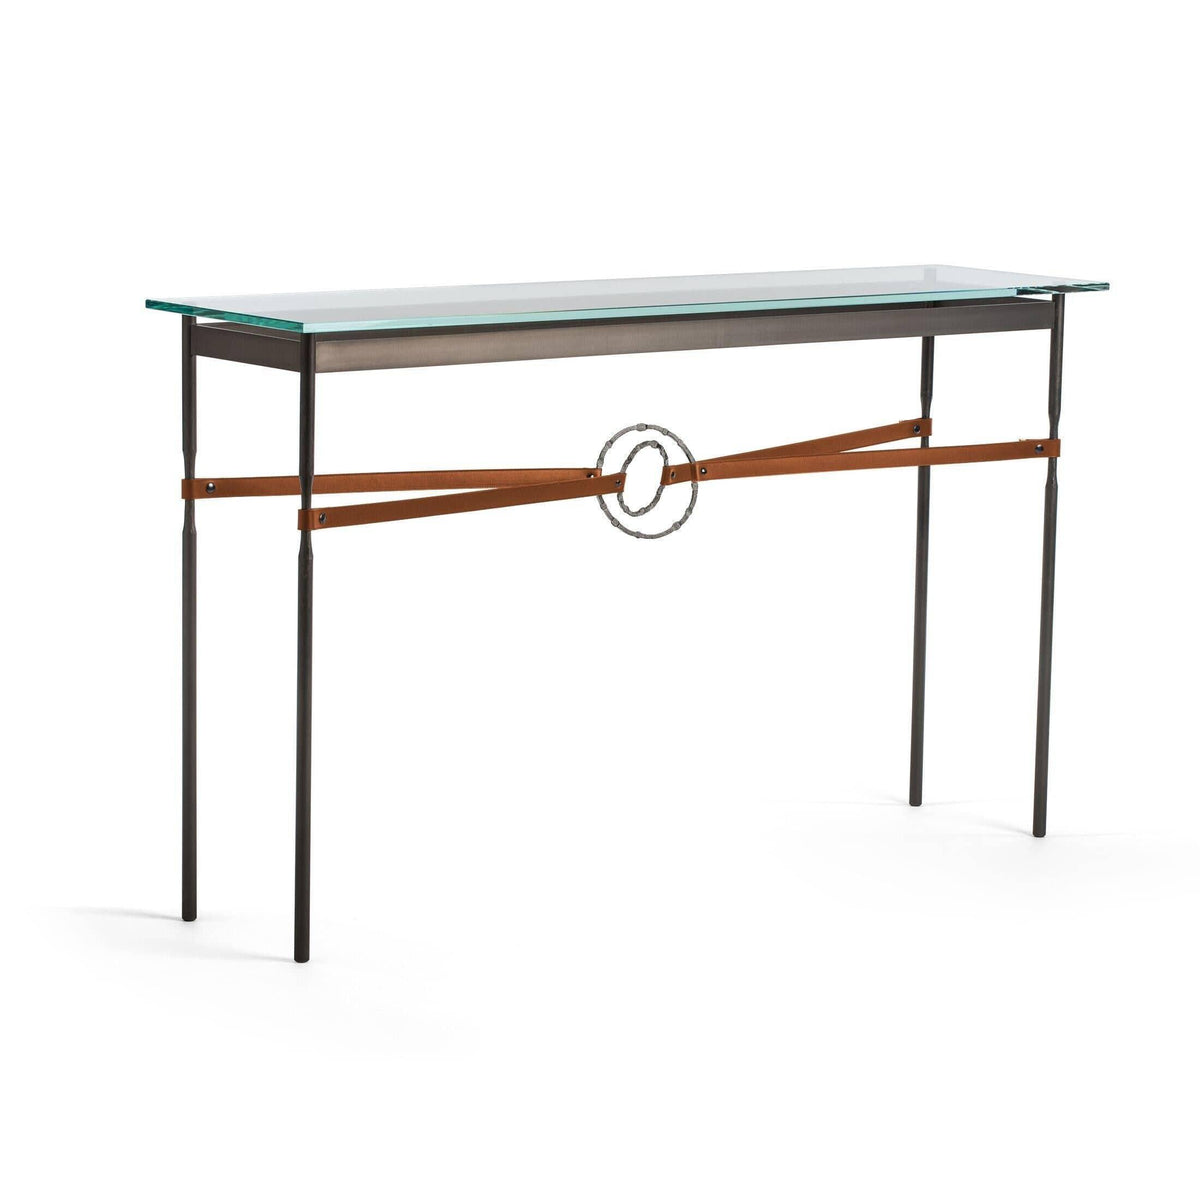 Hubbardton Forge - Equus Chestnut Leather Console Table - 750118-07-20-LC-VA0714 | Montreal Lighting & Hardware